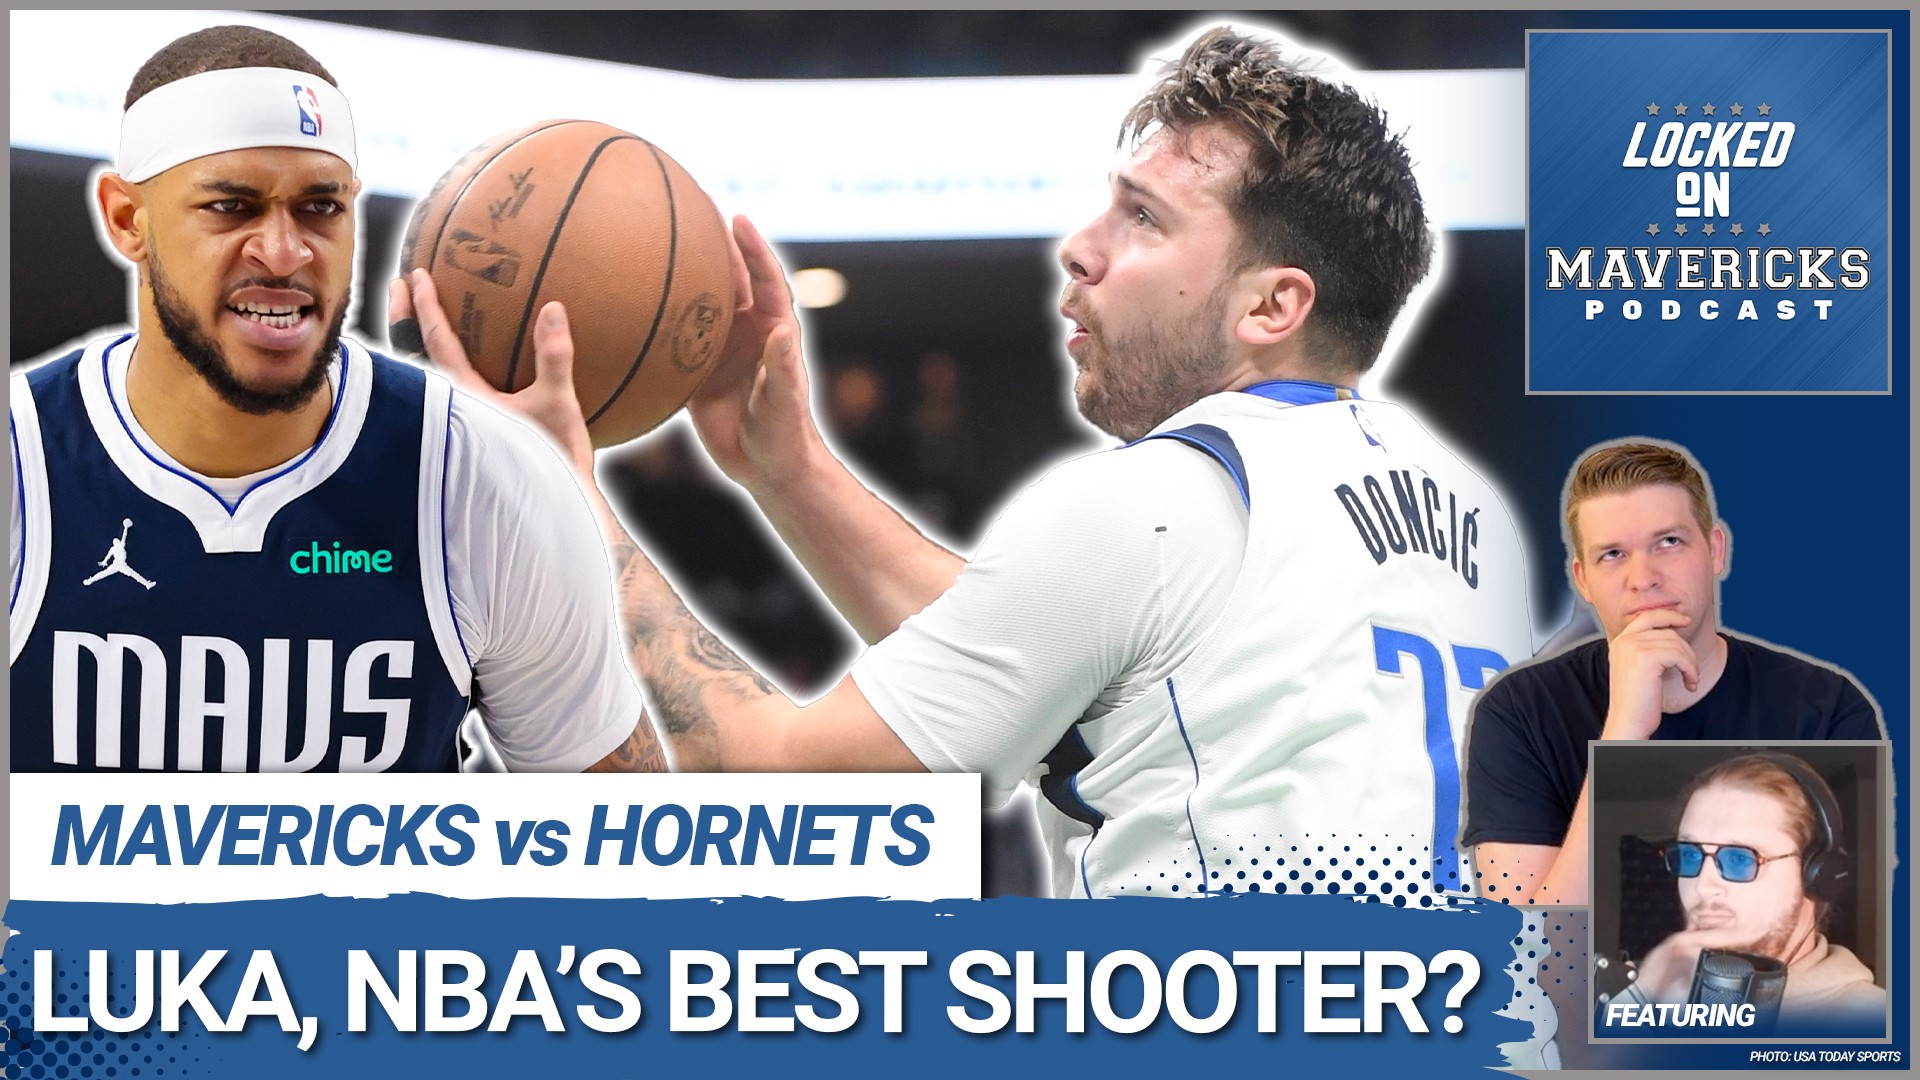 Nick Angstadt & Slightly Biased breakdown the Mavs win over the Hornets, if Luka Doncic is the *Best Shooter in the NBA, how Daniel Gafford raises their floor.